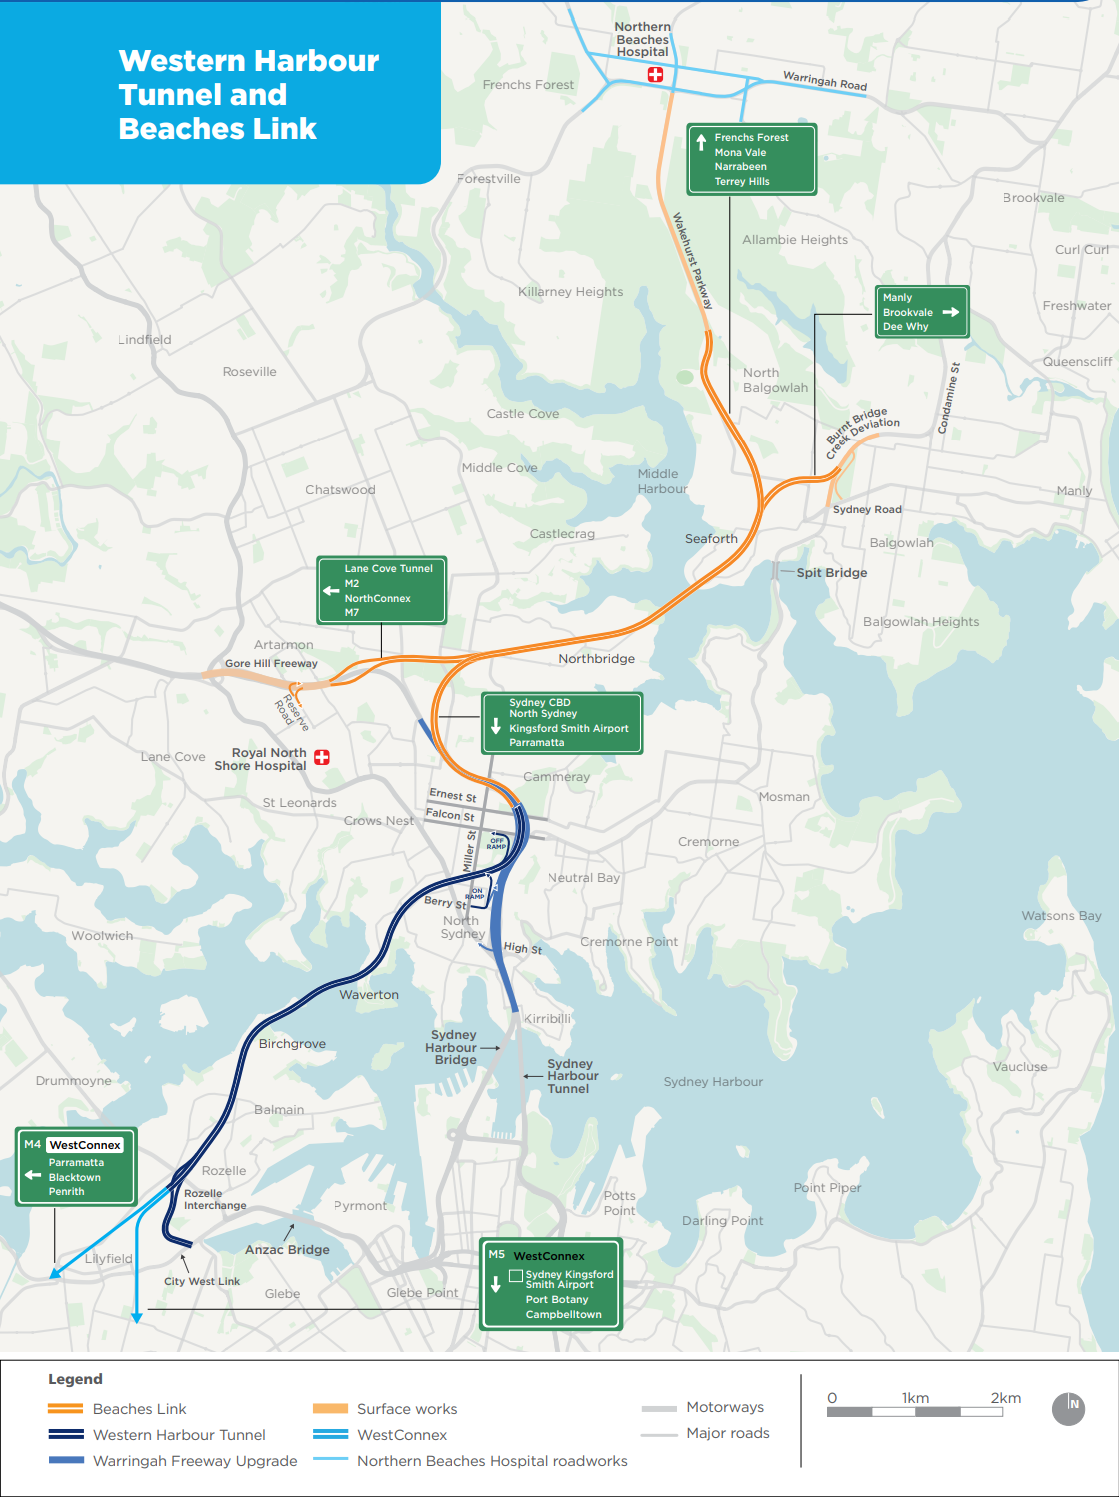 Transport for NSW's Environmental Impact Western Harbour Tunnel and Beaches Link plan.